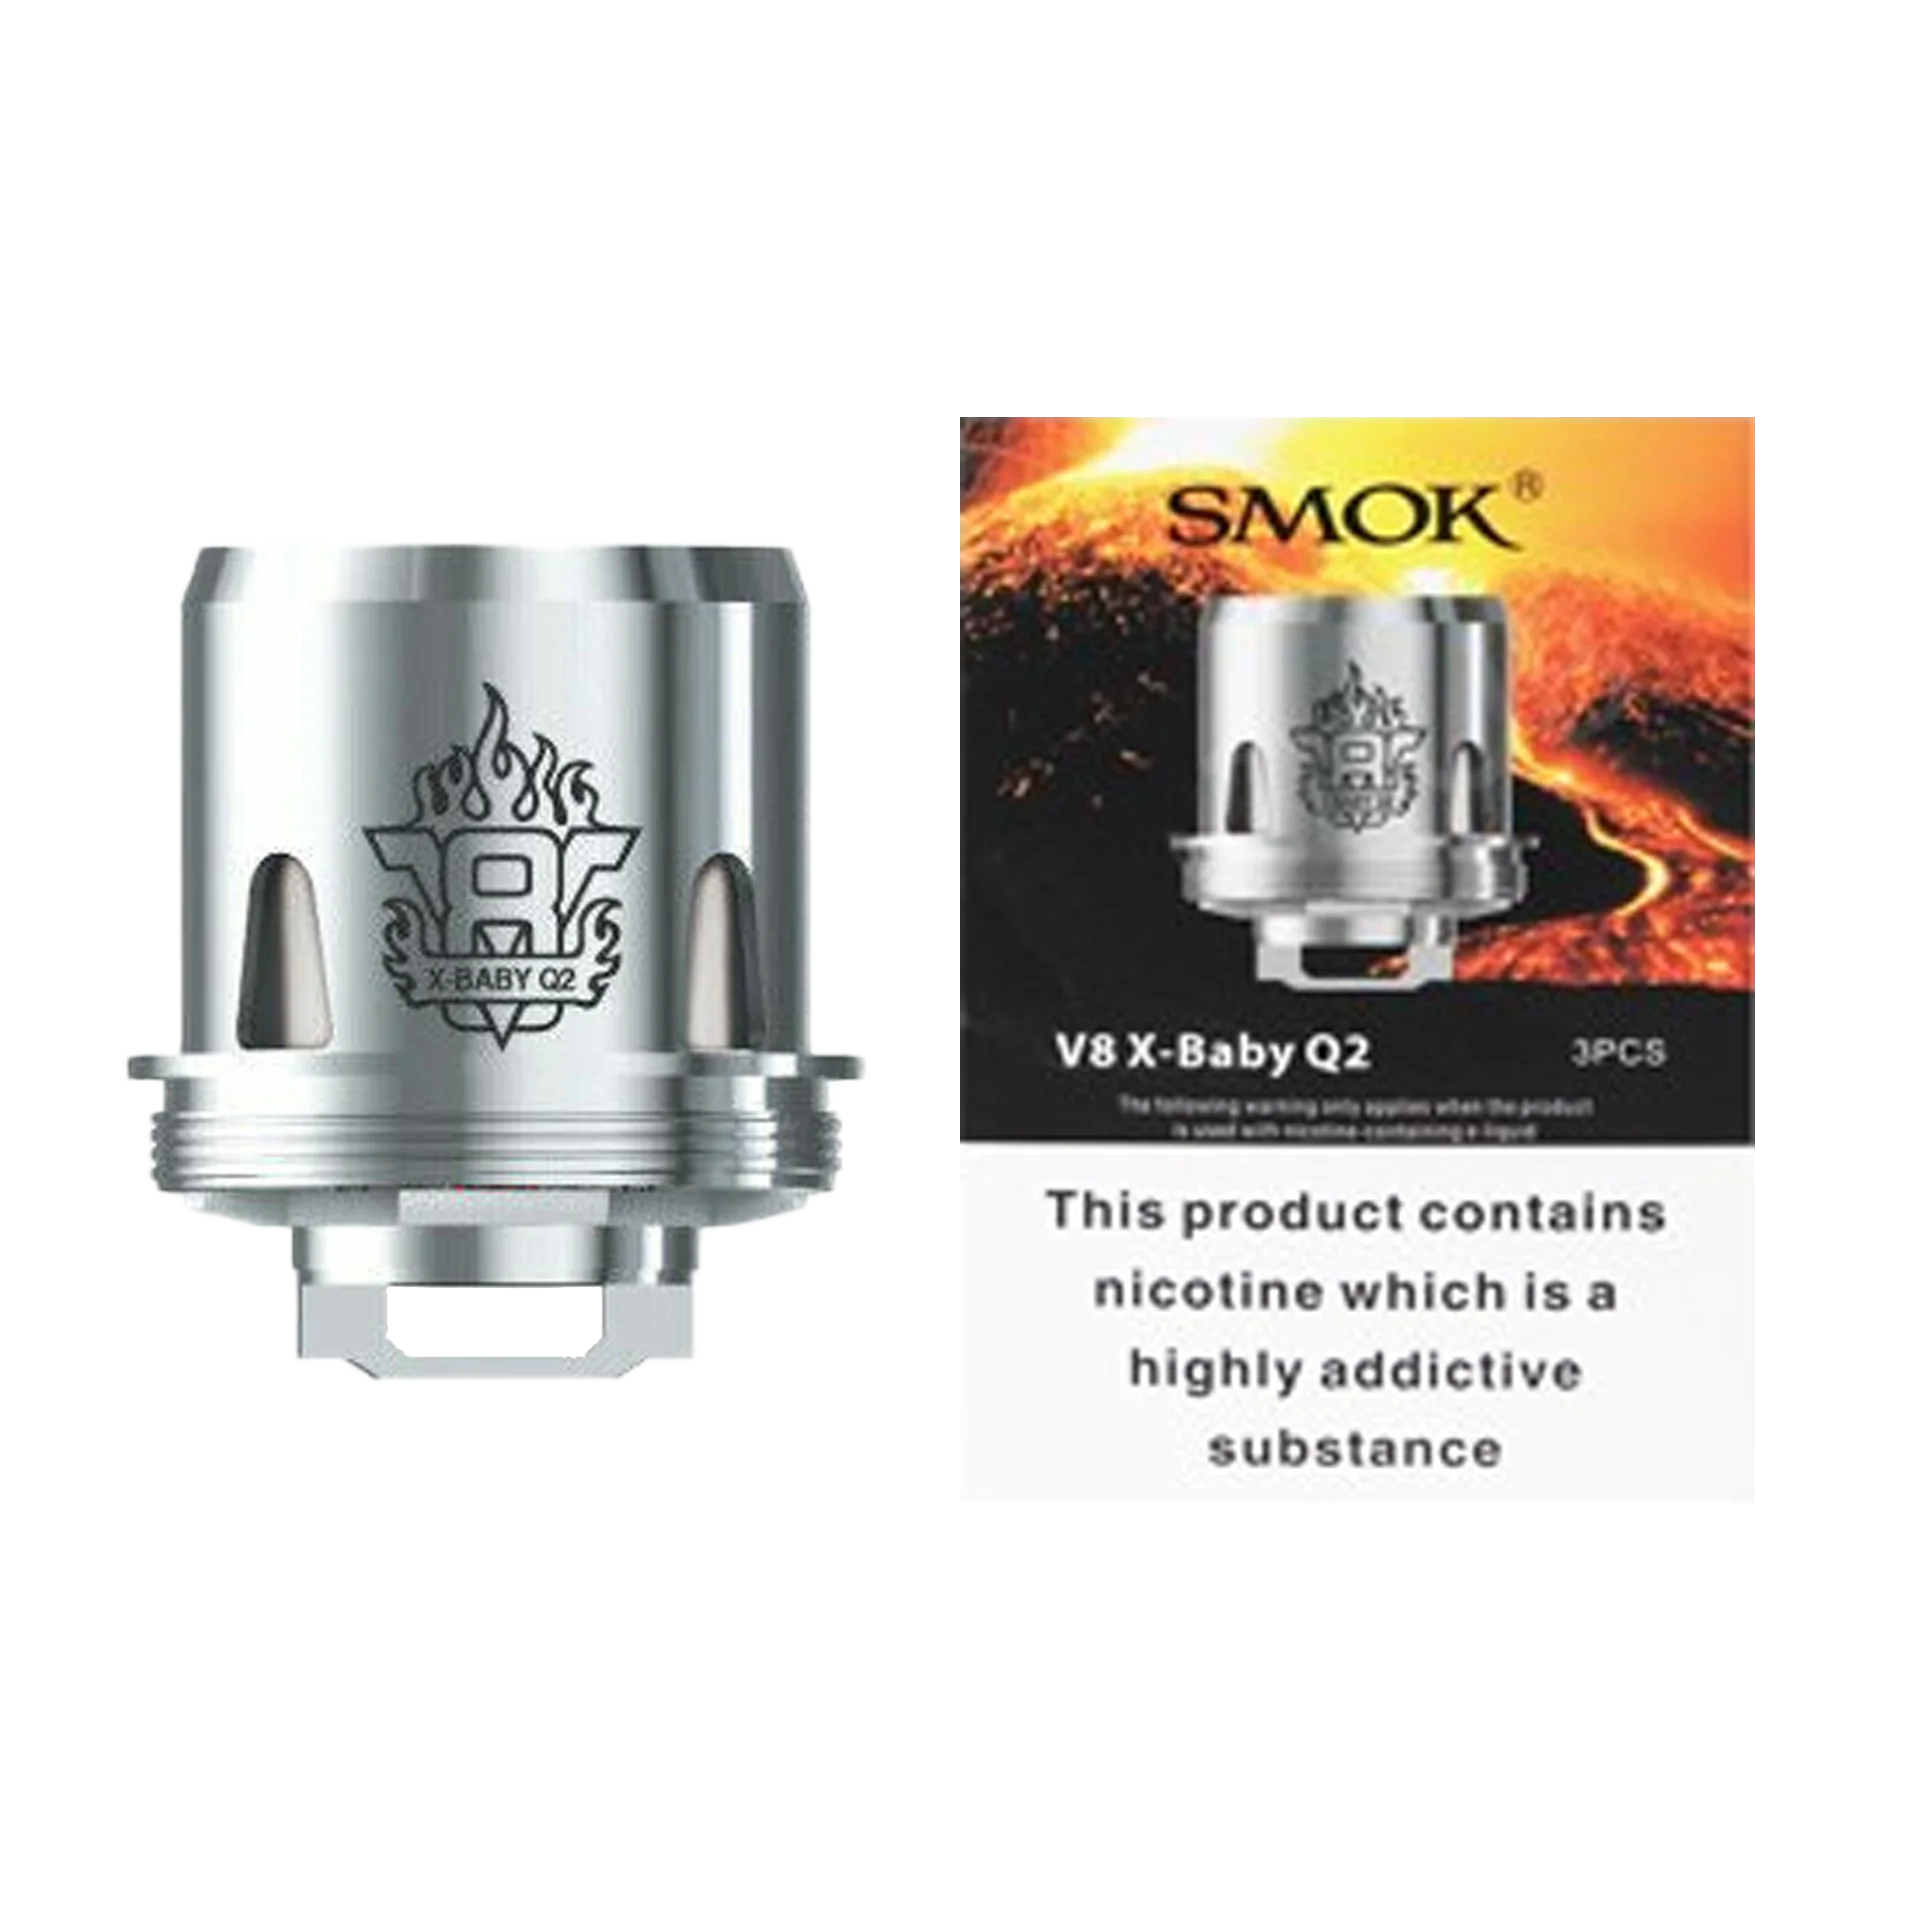 Smok V8 X-Baby Q2 Replacement Coils